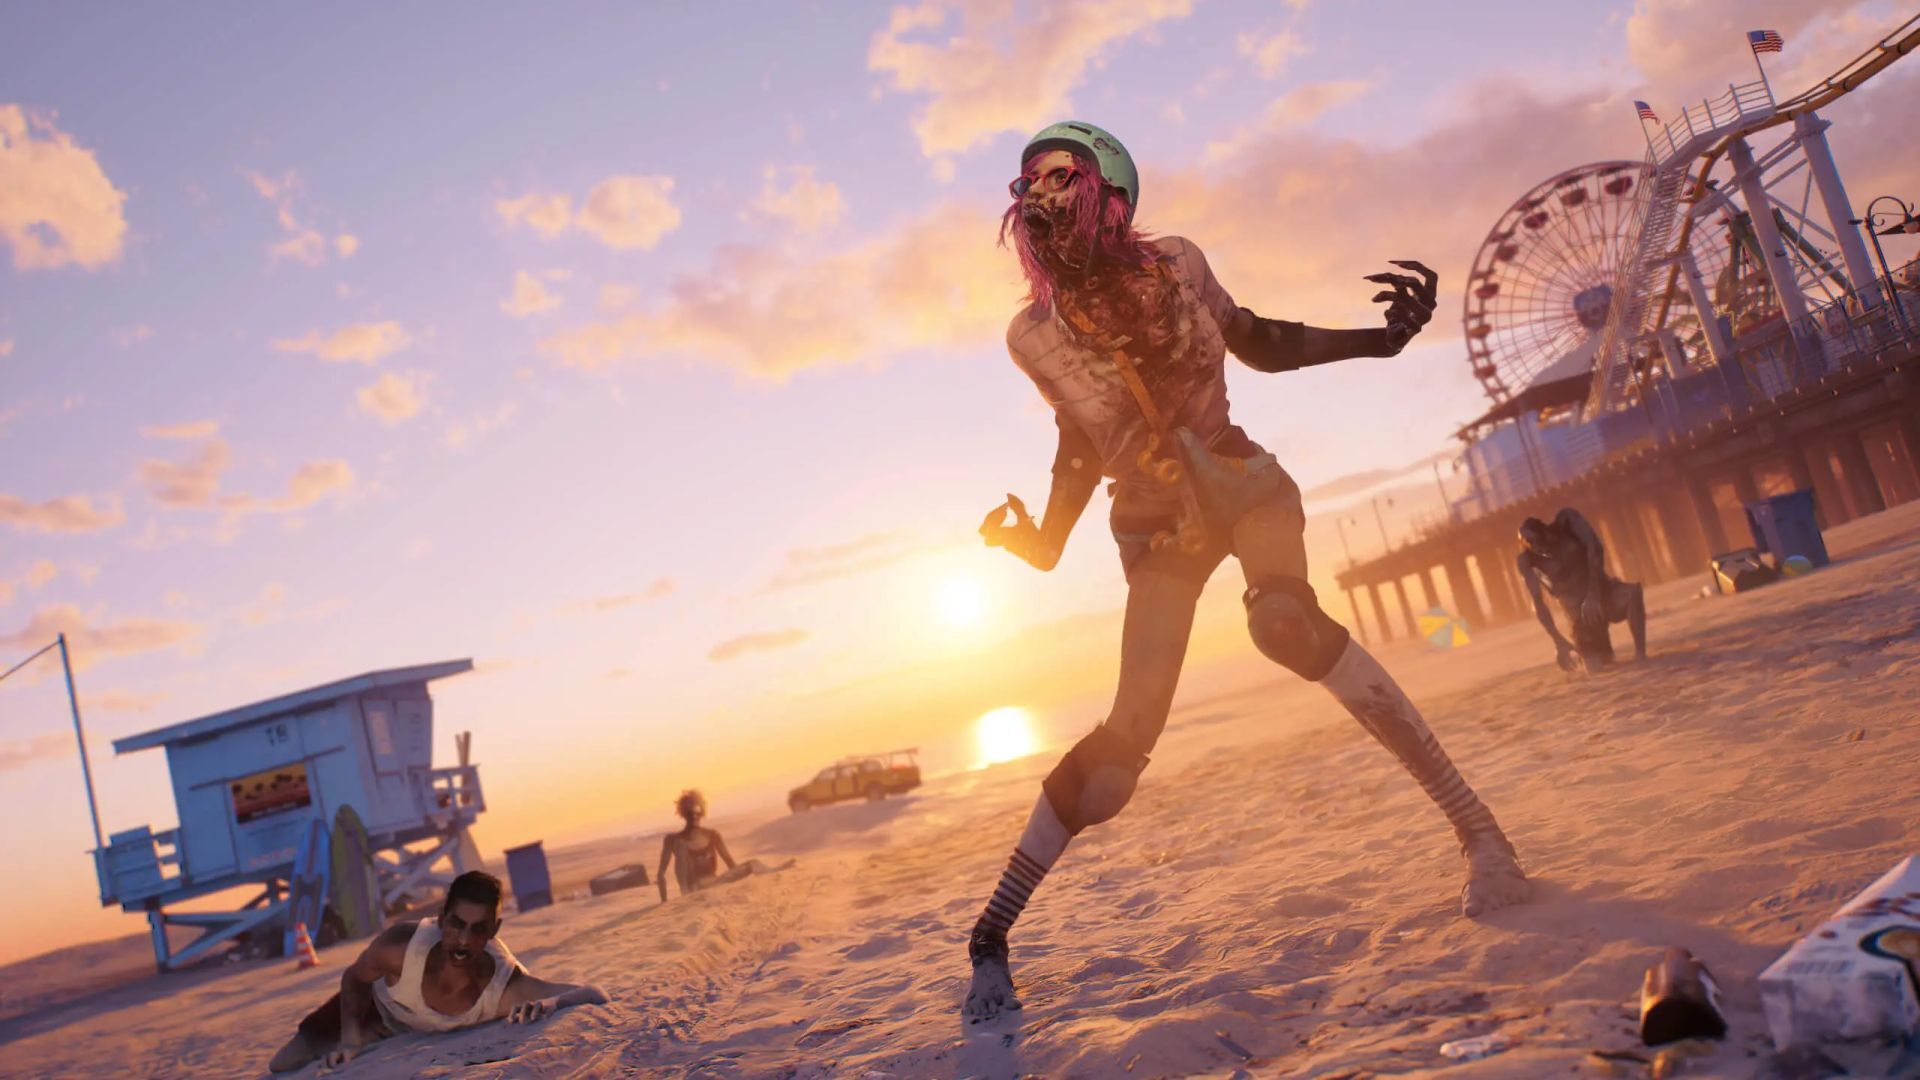 An undead woman stands on the beach at sunset.